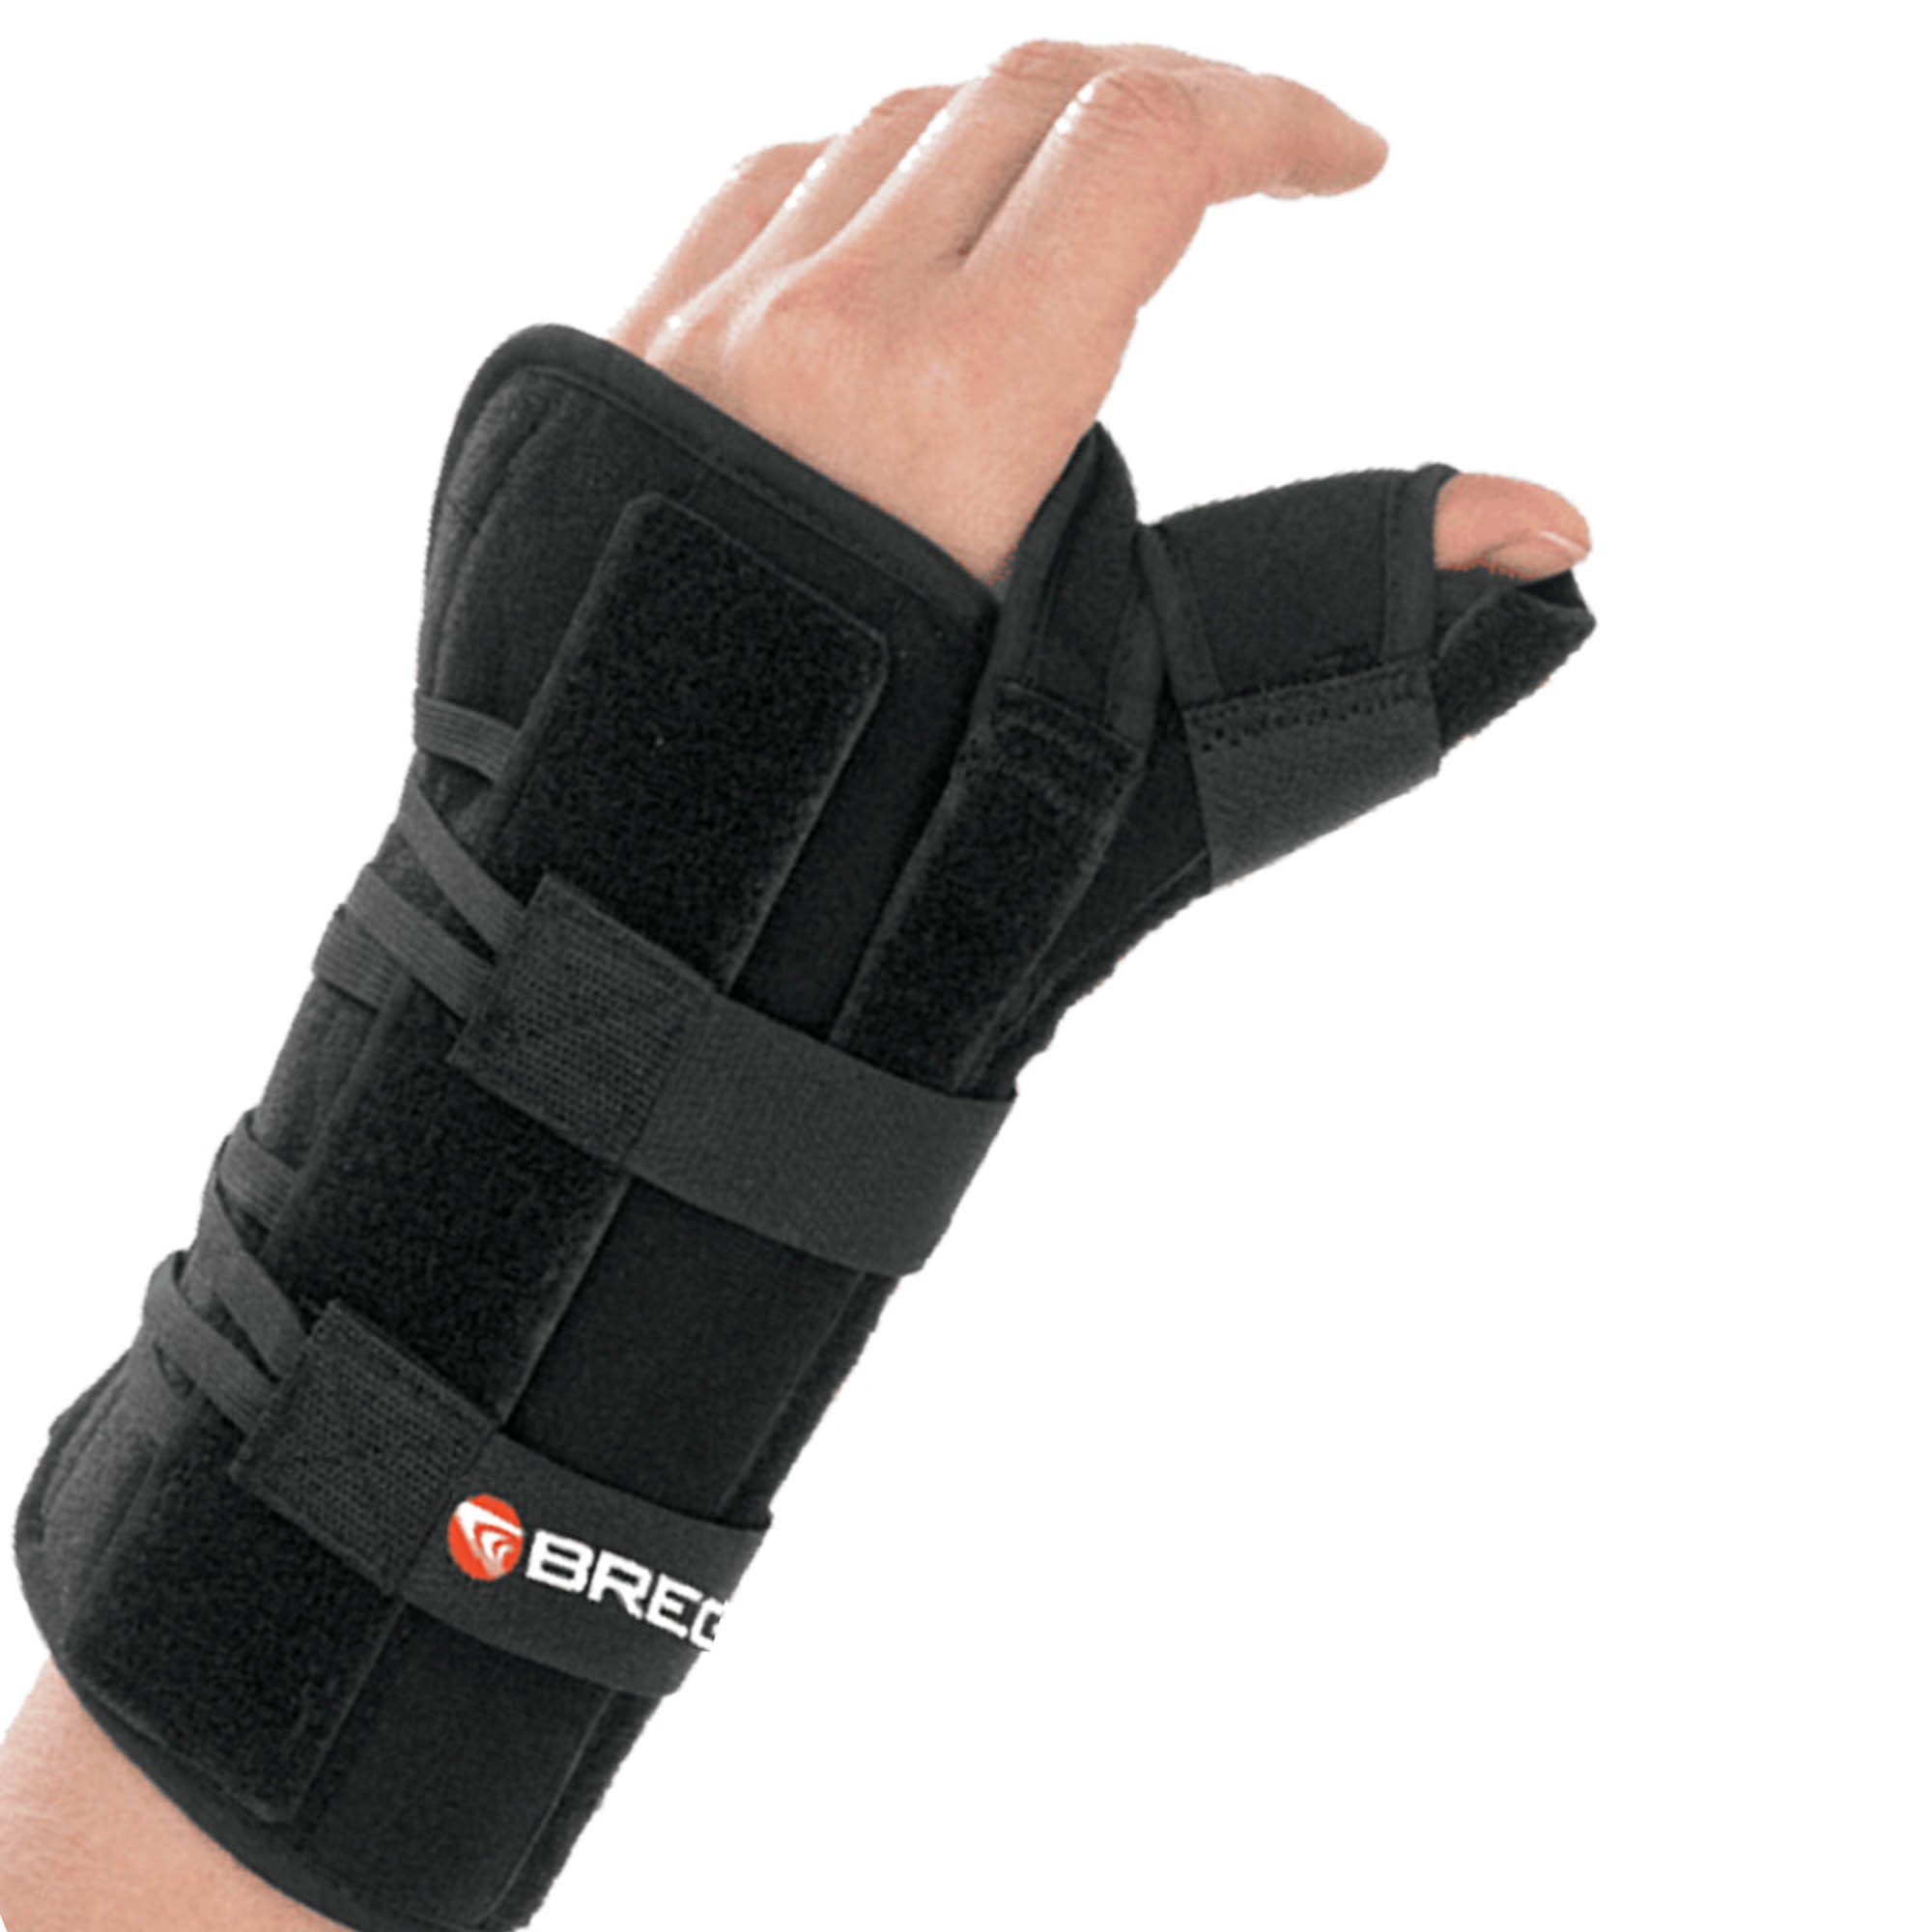 Breg Apollo® Universal 8-inch Length Left Wrist Brace with Thumb Spica, One Size Fits Most.